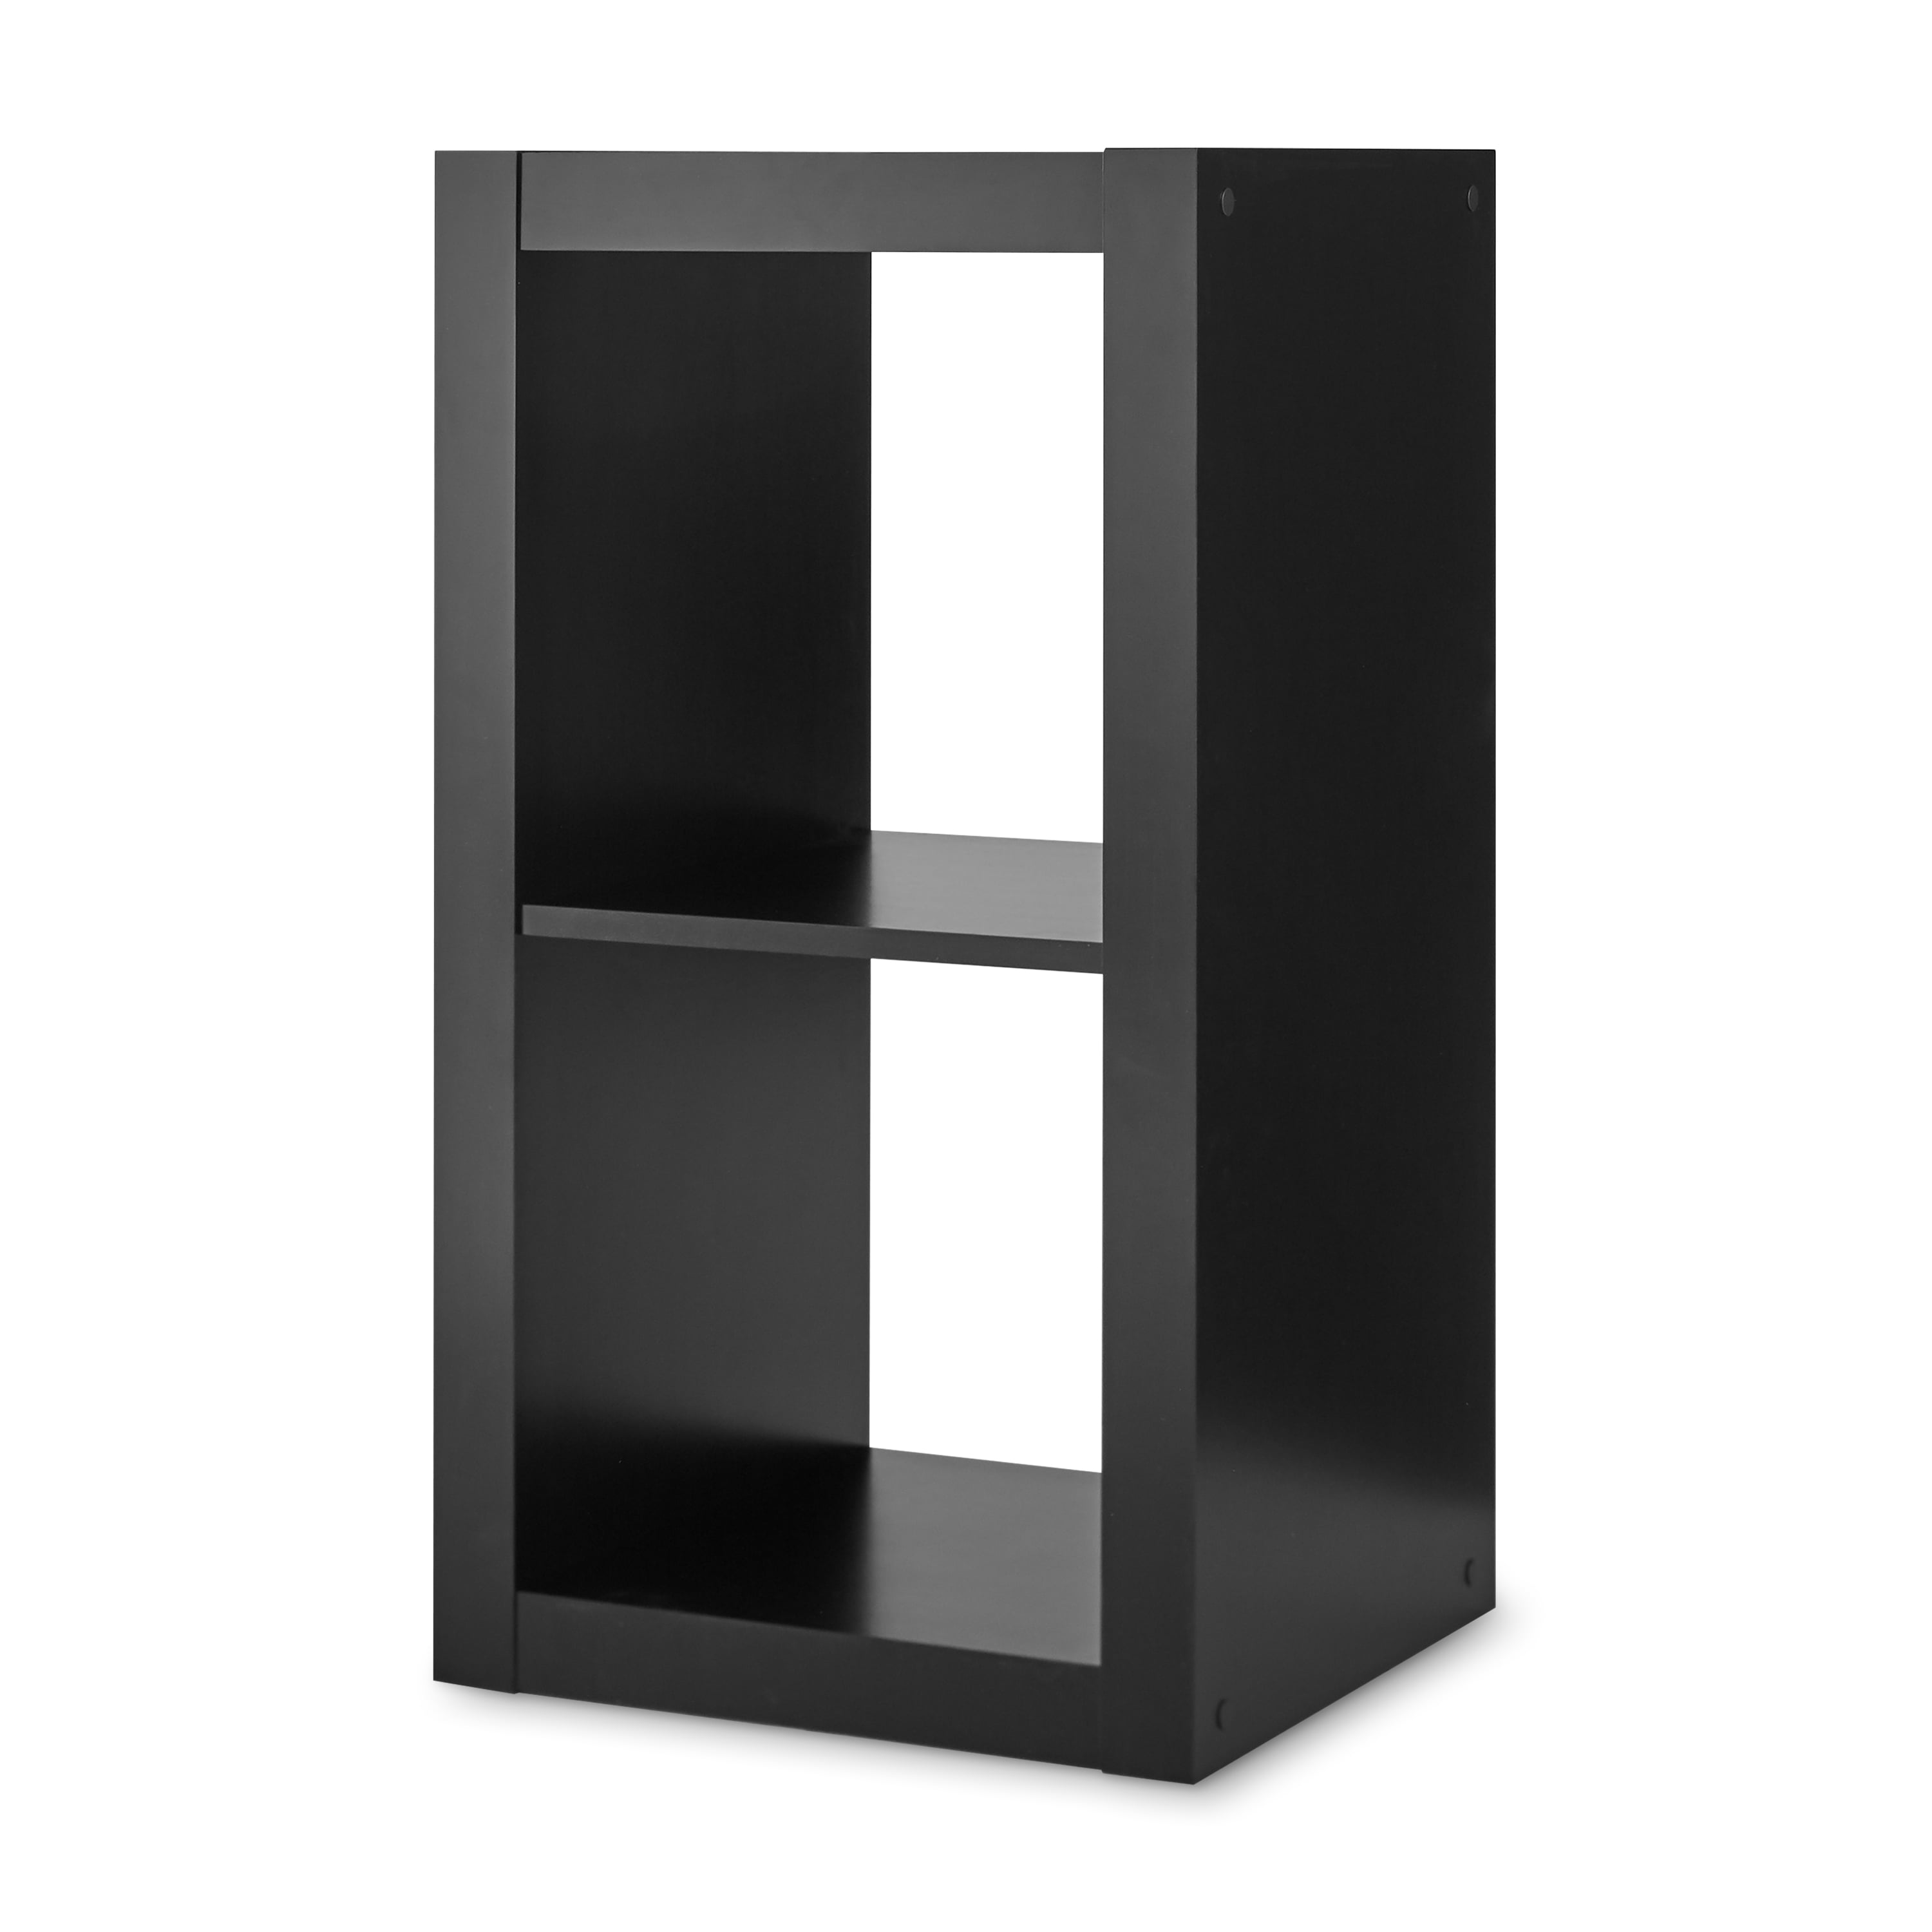 Better Homes & Gardens 16-Cube Square Storage Organizer, Multiple Finishes, Size: Large 57.40 x W 15.35 x H 56.85